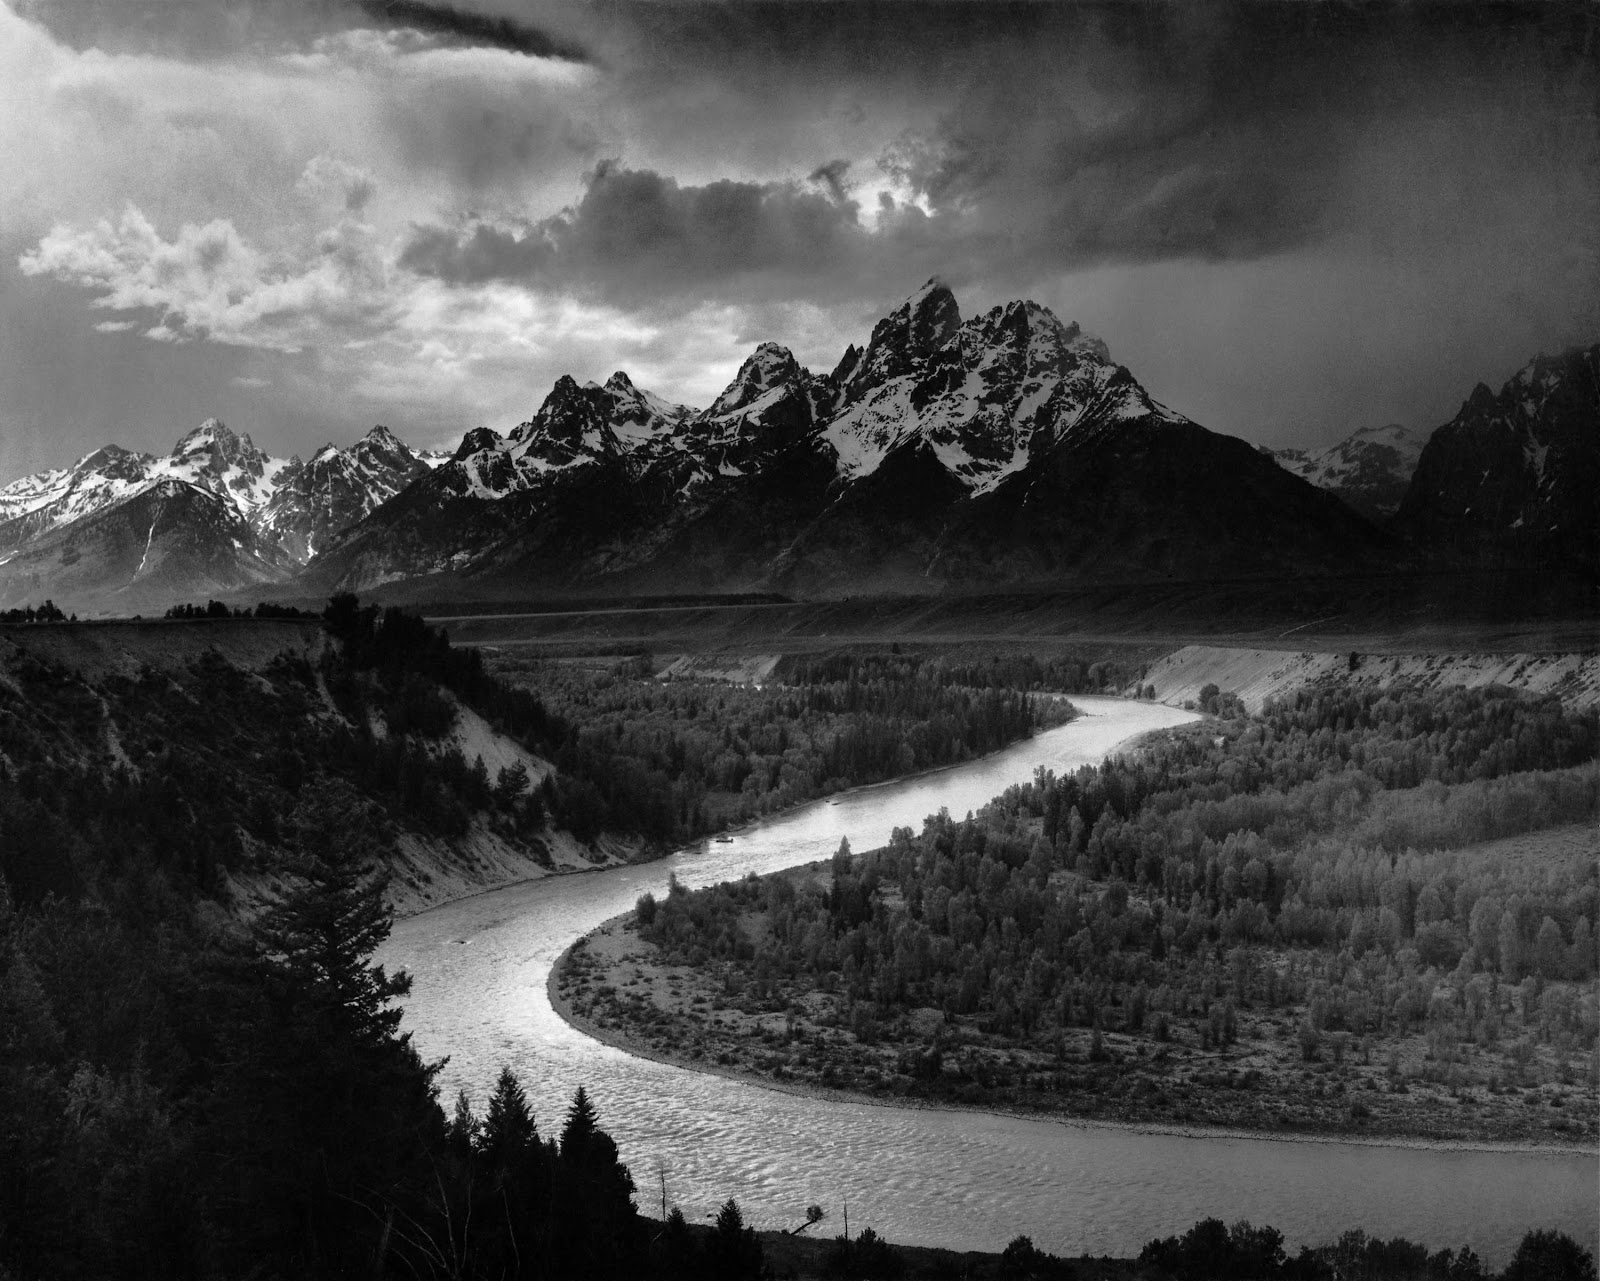 'The Tetons and the Snake River'. Ansel Adams